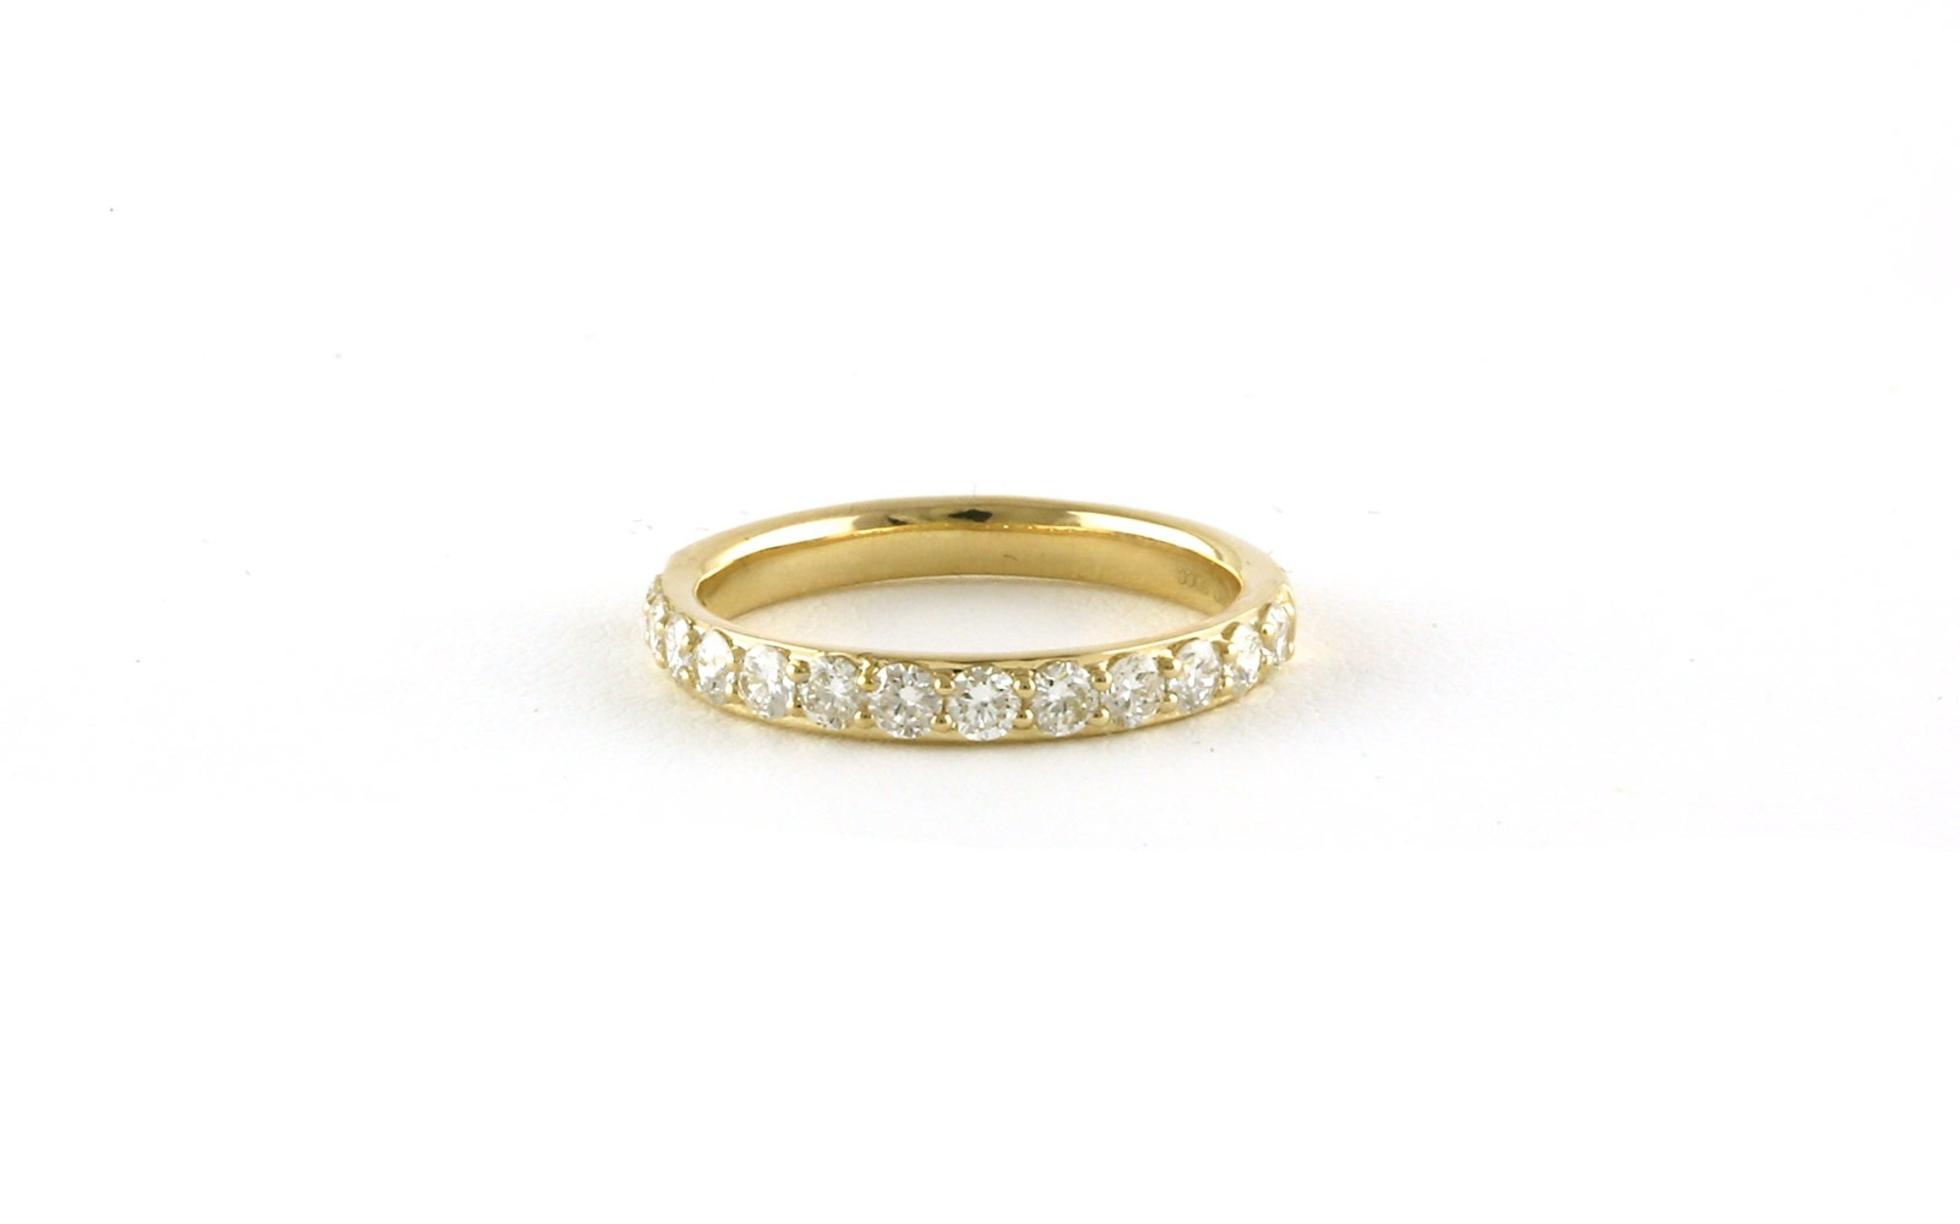 13-Stone Share-prong Diamond Wedding Band in Yellow Gold (0.75cts TWT)